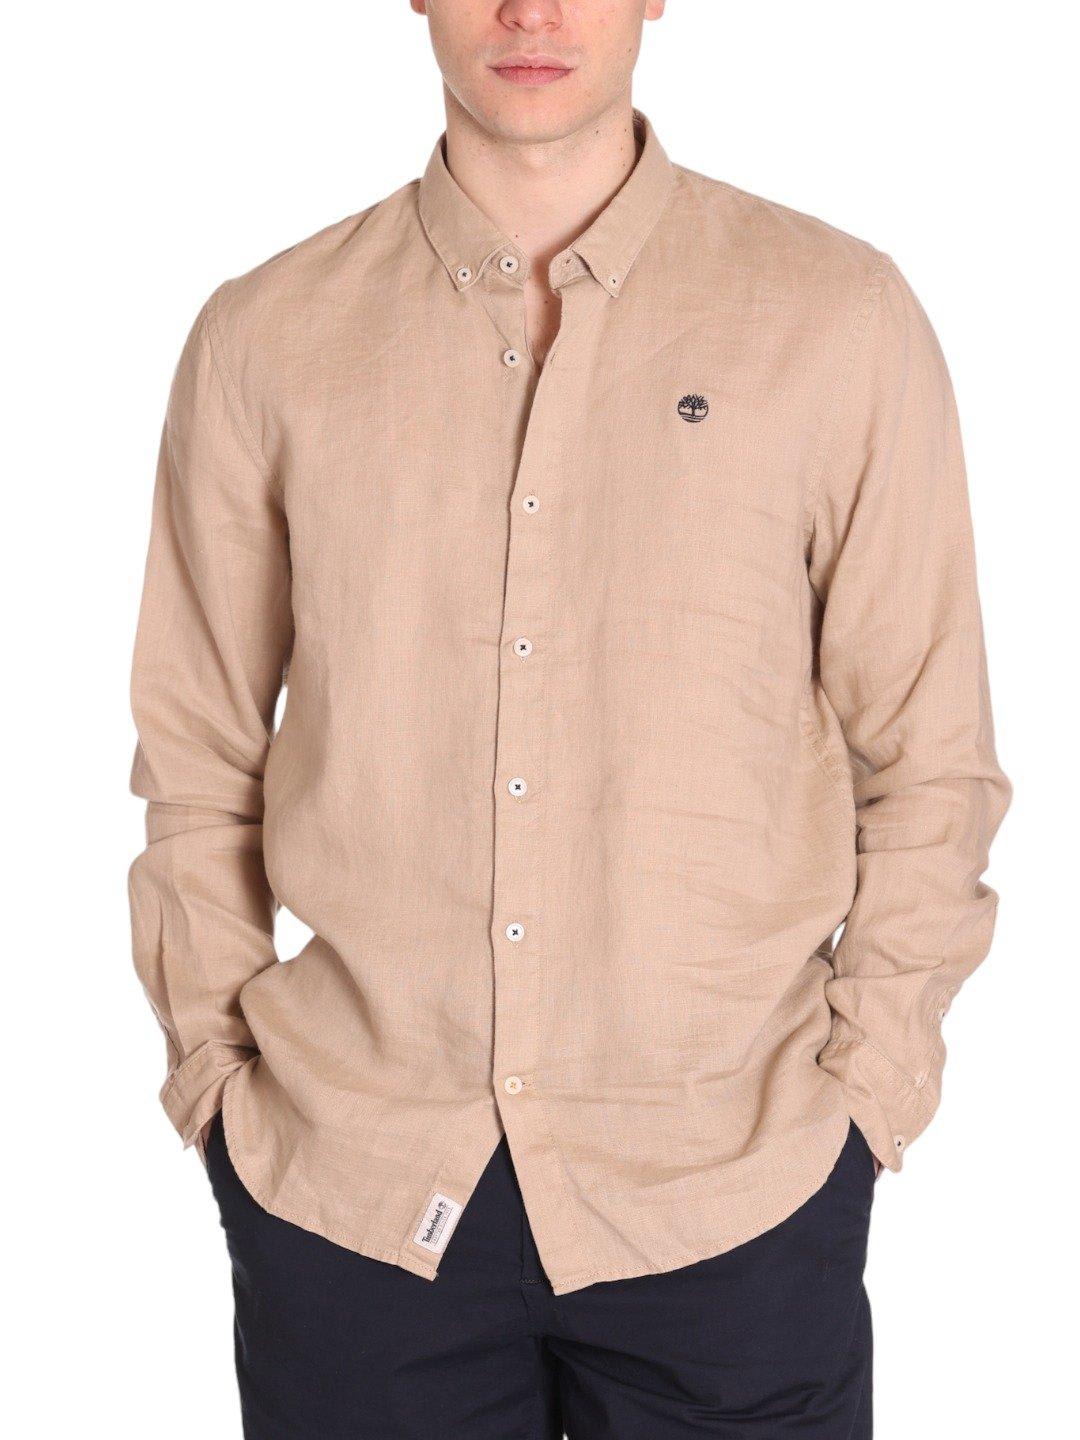 TIMBERLAND LOGO EMBROIDERED BUTTONED SHIRT